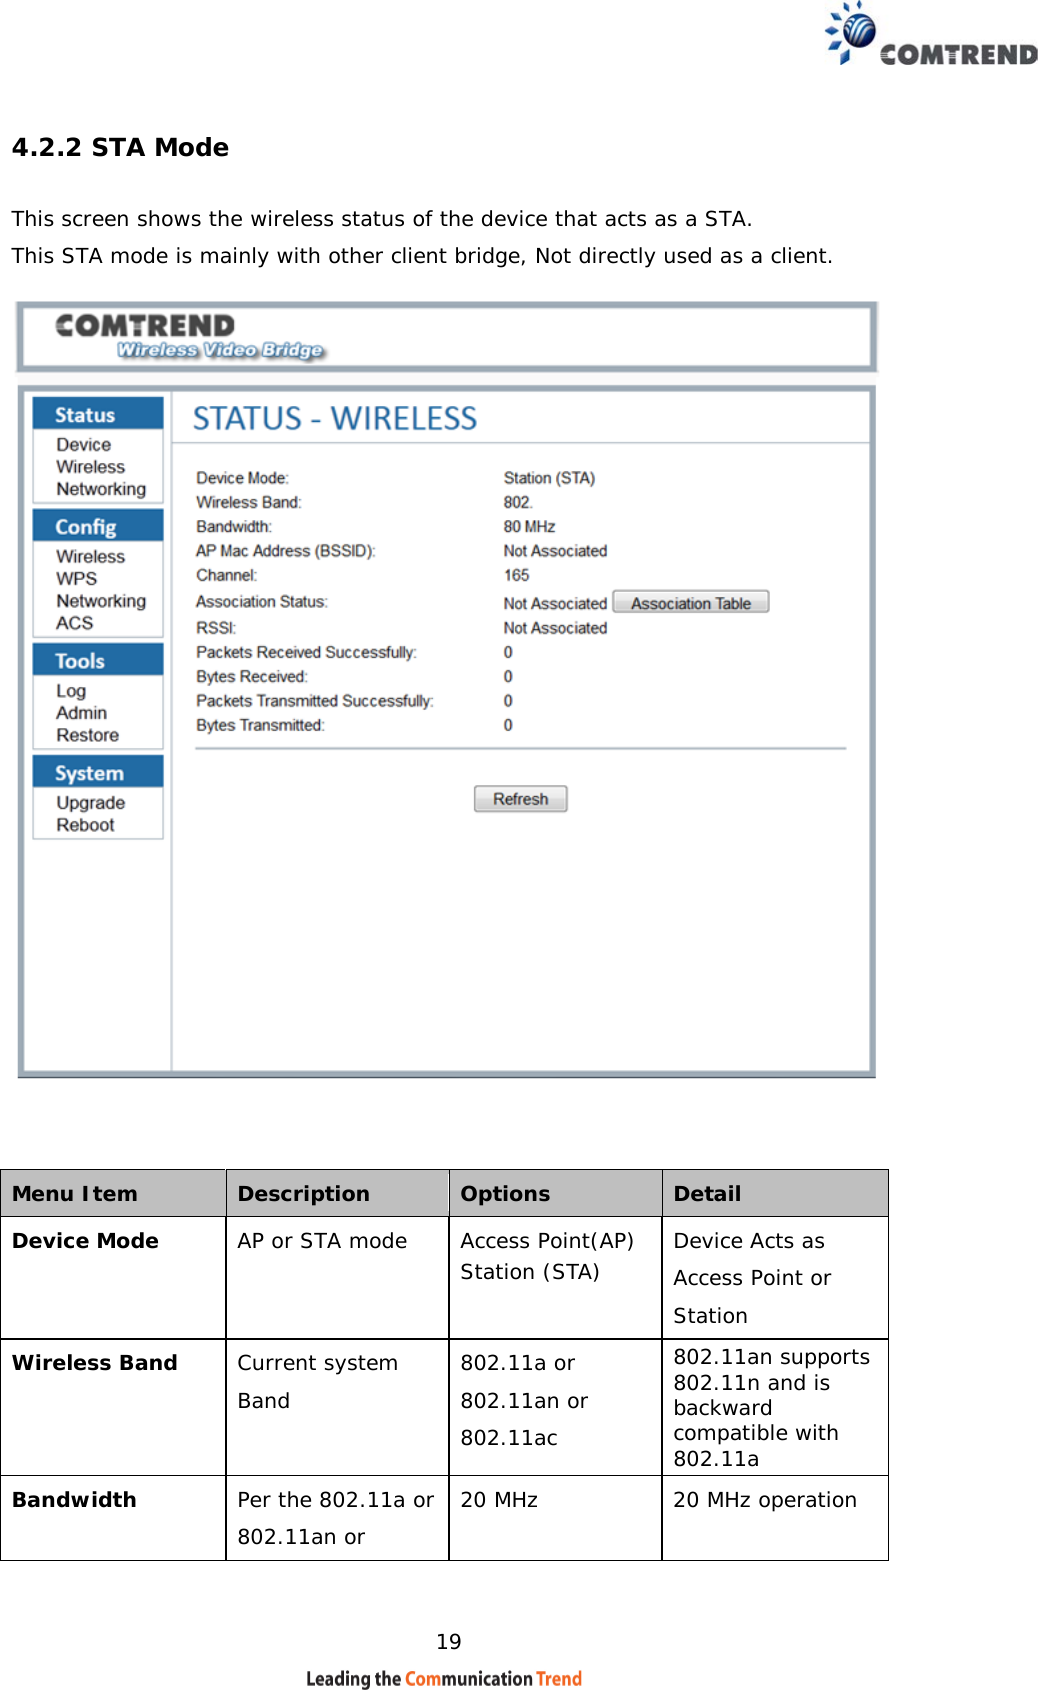    19 4.2.2 STA Mode This screen shows the wireless status of the device that acts as a STA.  This STA mode is mainly with other client bridge, Not directly used as a client.      Menu Item  Description   Options   Detail  Device Mode   AP or STA mode   Access Point(AP)  Station (STA) Device Acts as Access Point or Station Wireless Band   Current system Band   802.11a or 802.11an or 802.11ac  802.11an supports 802.11n and is backward compatible with 802.11a Bandwidth Per the 802.11a or  802.11an or 20 MHz   20 MHz operation   